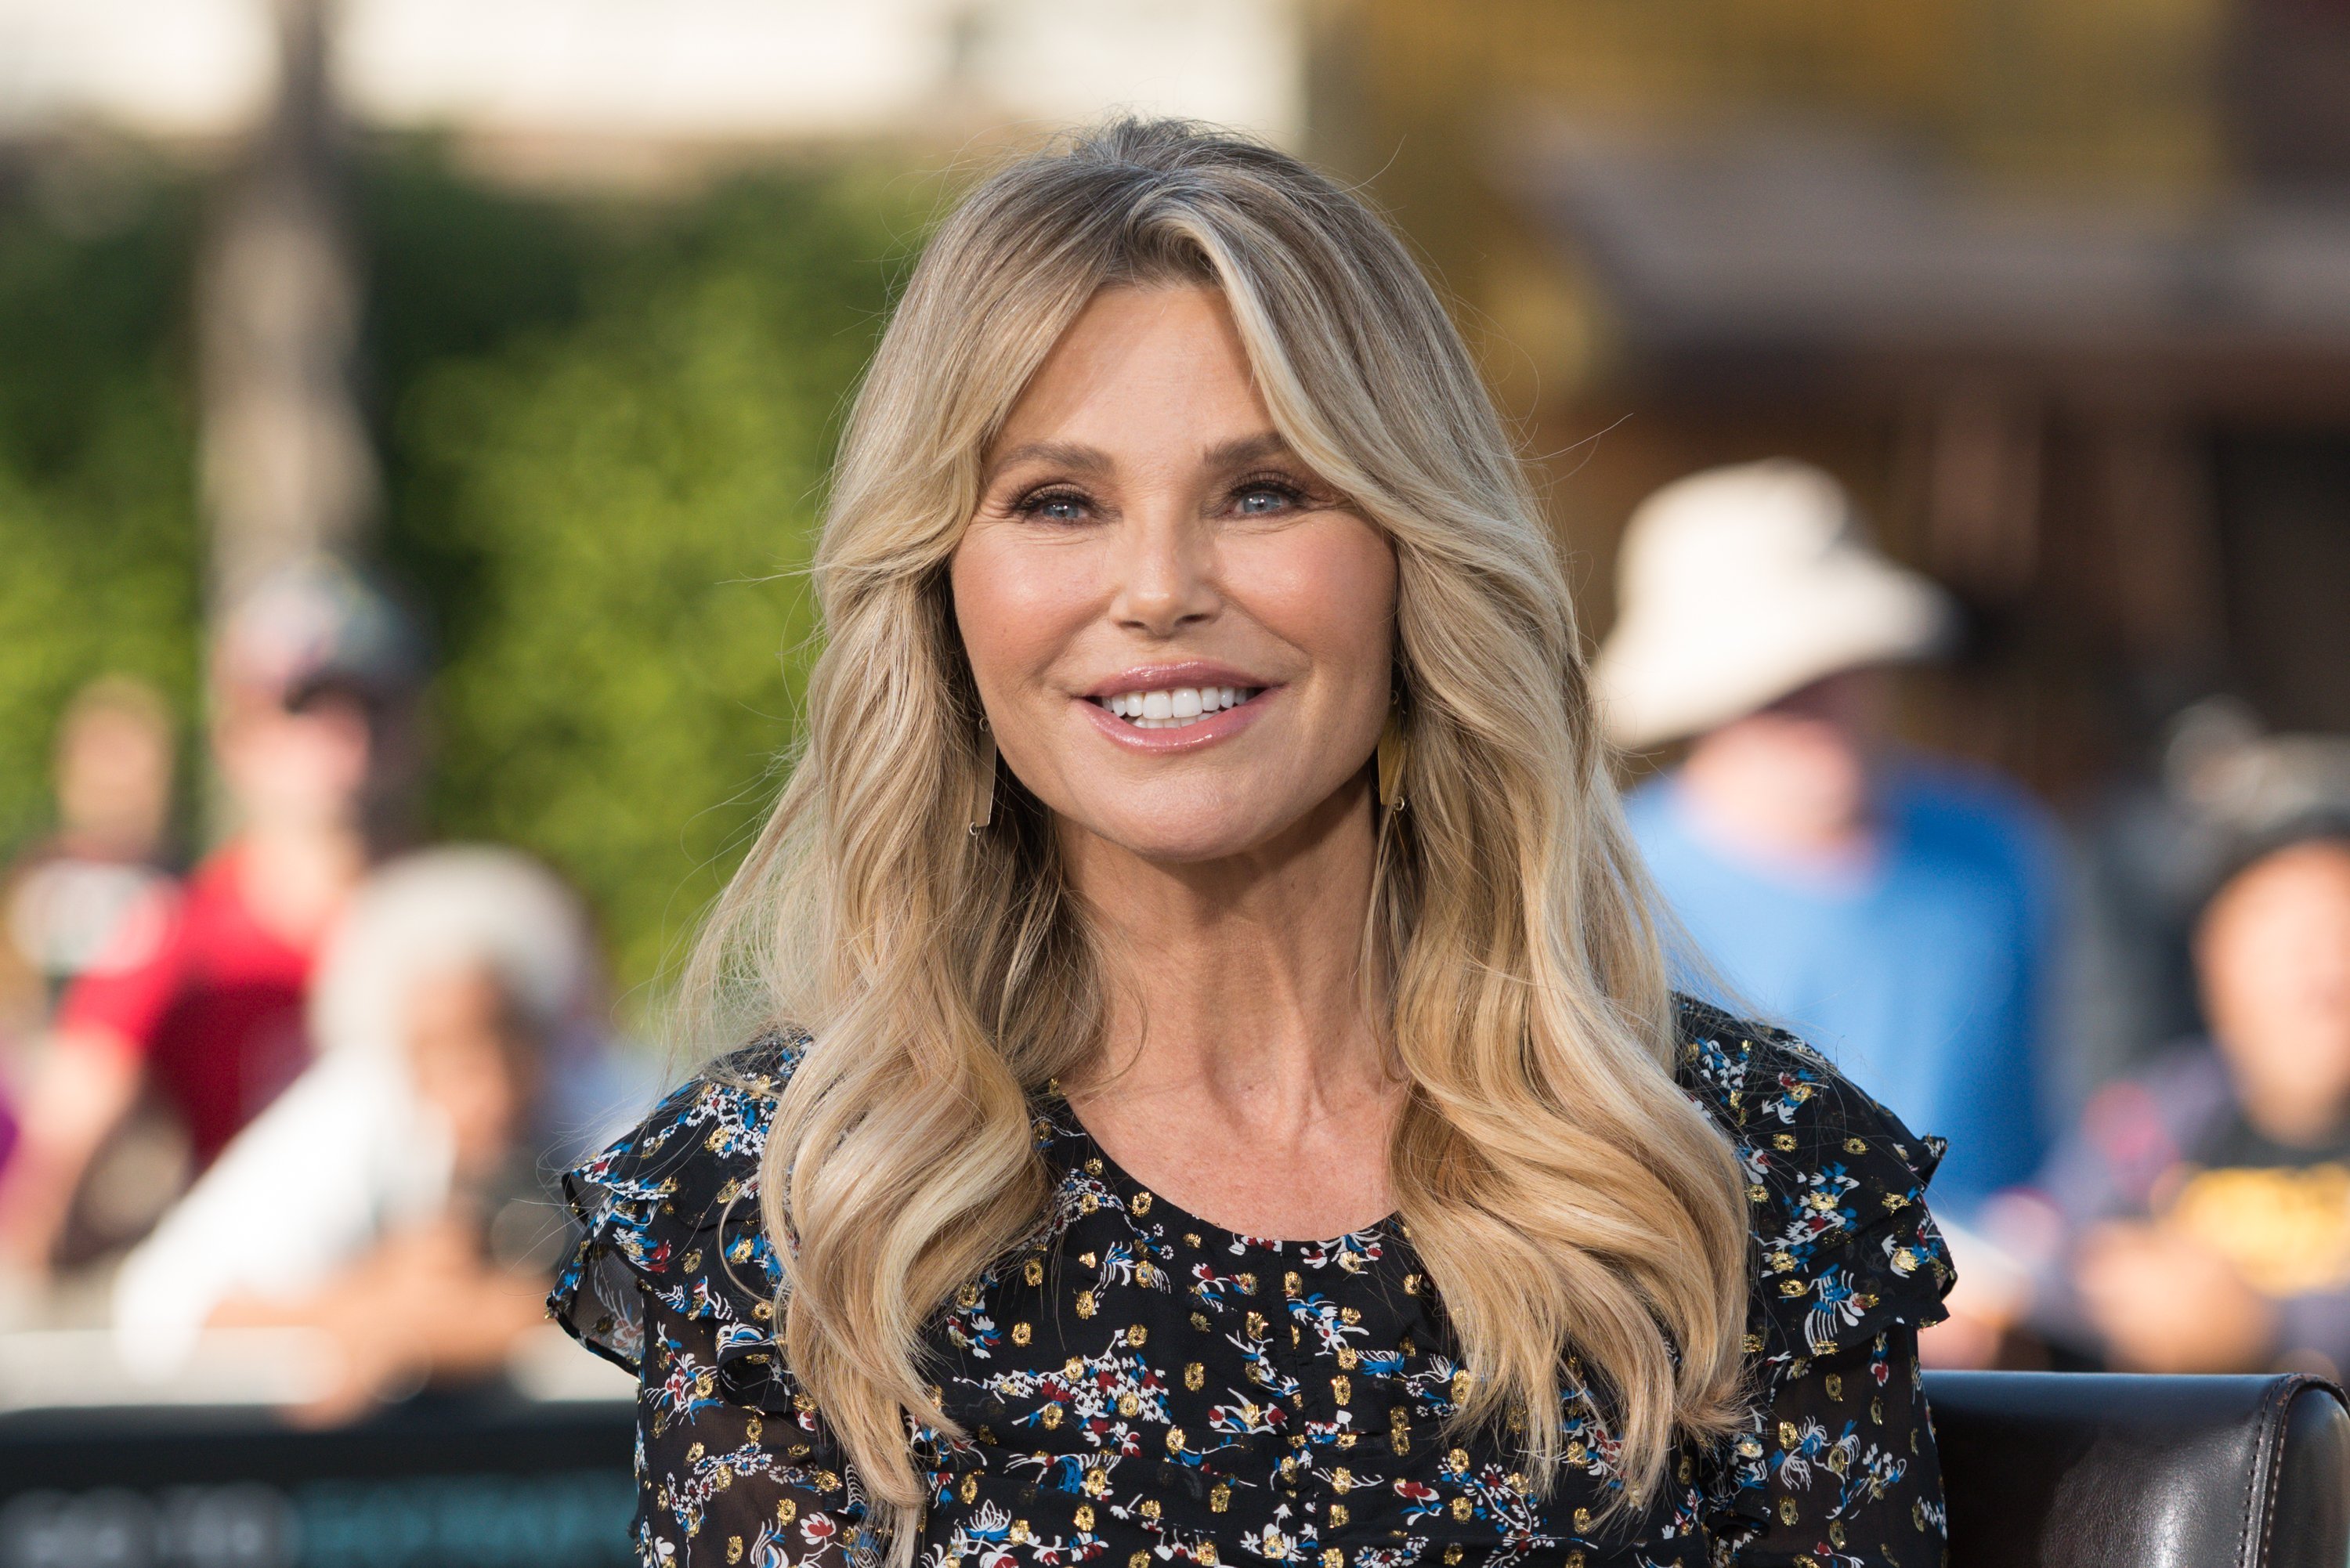 Christie Brinkley visits "Extra" at Universal Studios Hollywood on January 18, 2018, in Universal City, California. | Source: Getty Images.